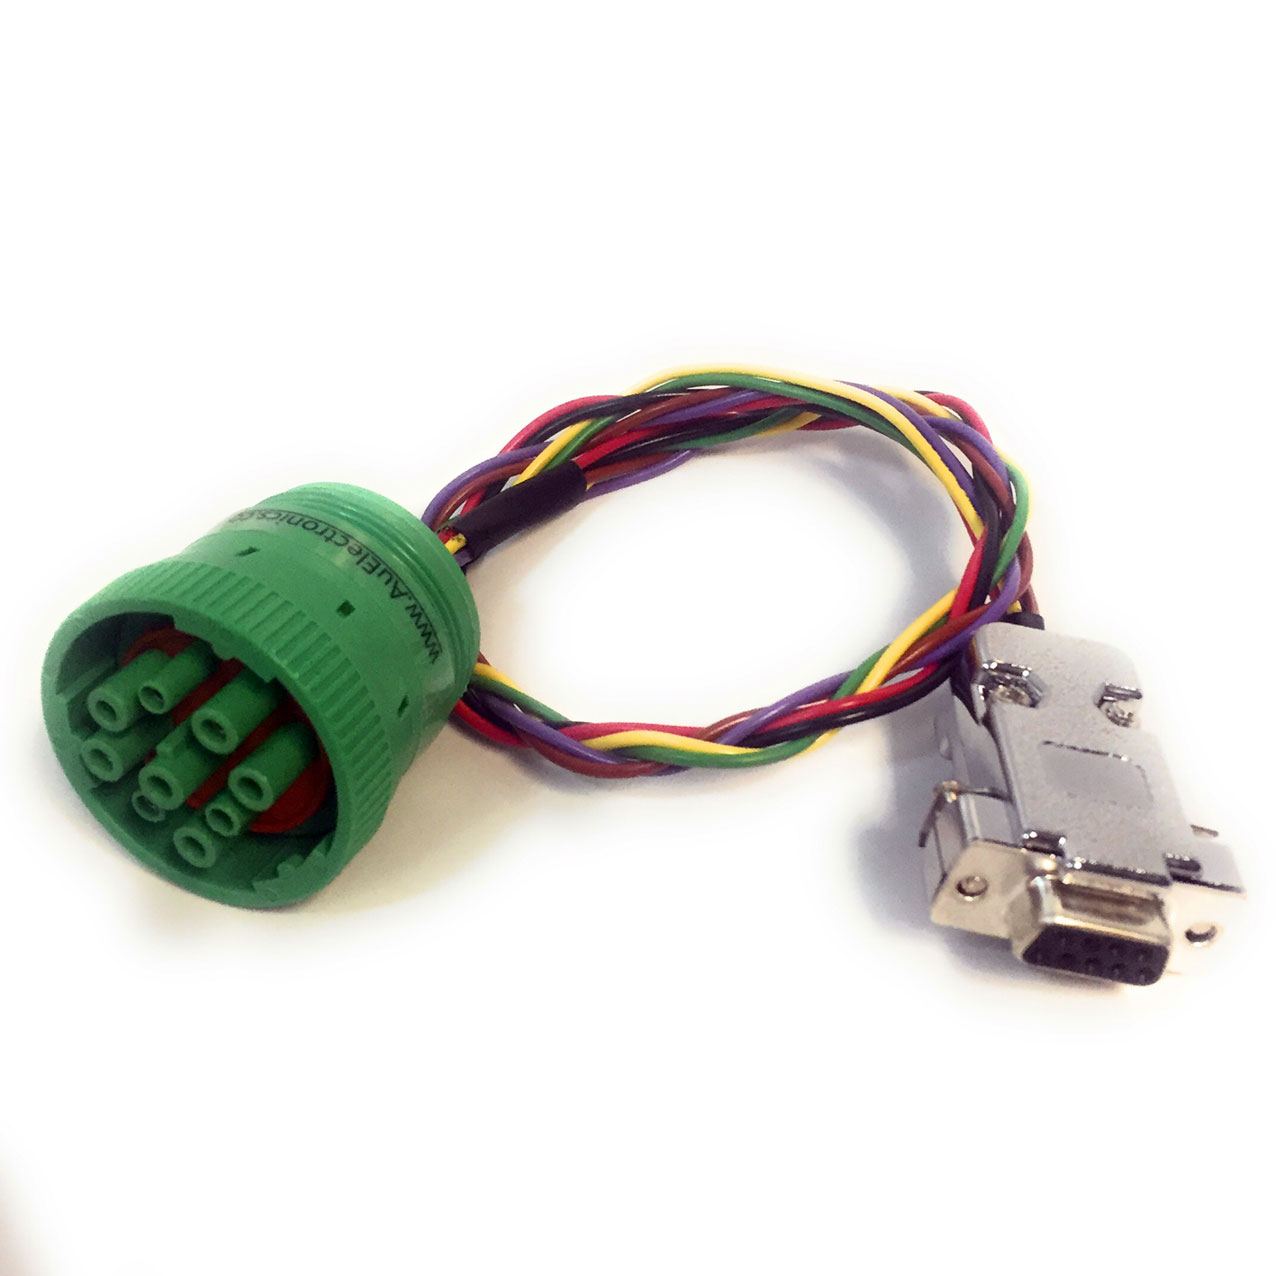 Au J1939/J1708 Combo Cable with DB9 Female Connector and 9-way green round threaded plug